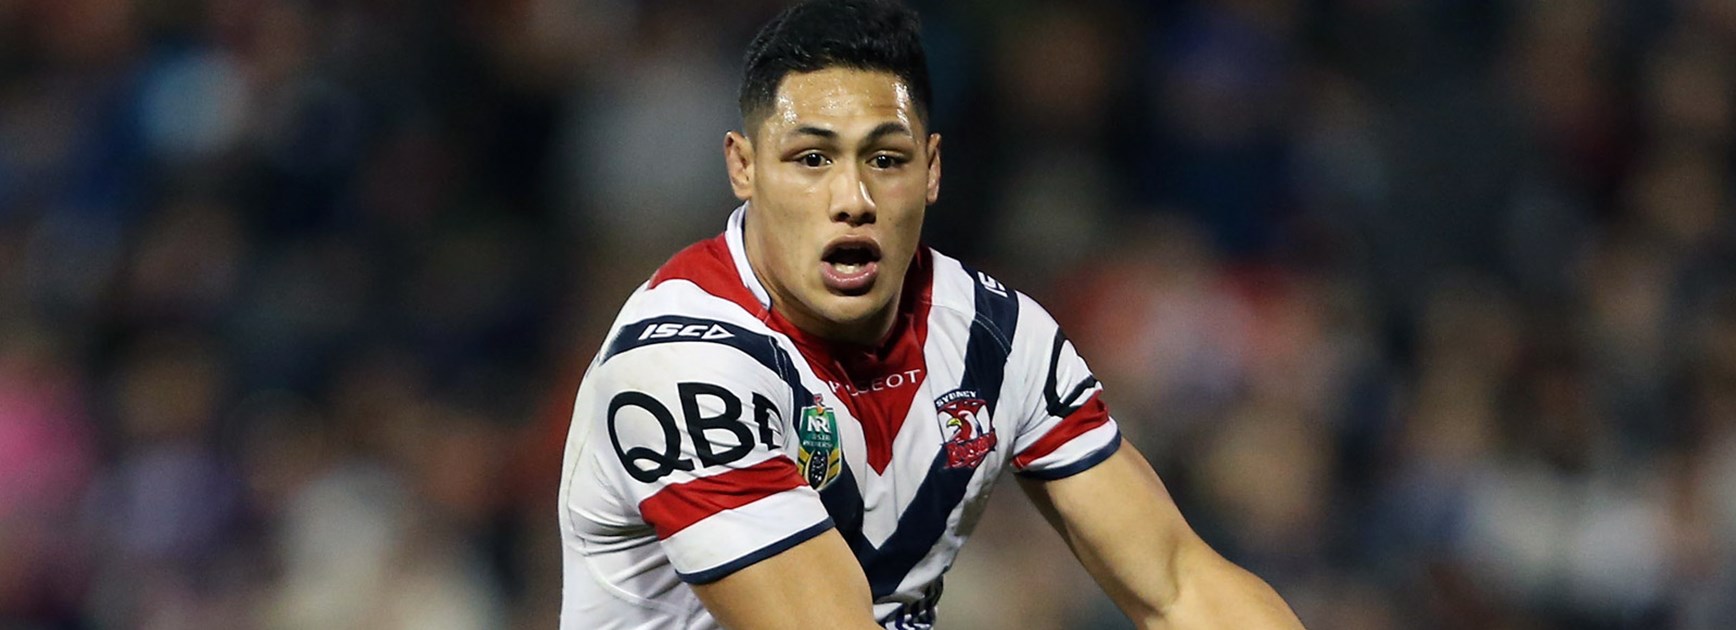 Roger Tuivasa-Sheck made eight tackle breaks in the Roosters' Round 18 win over Penrith.